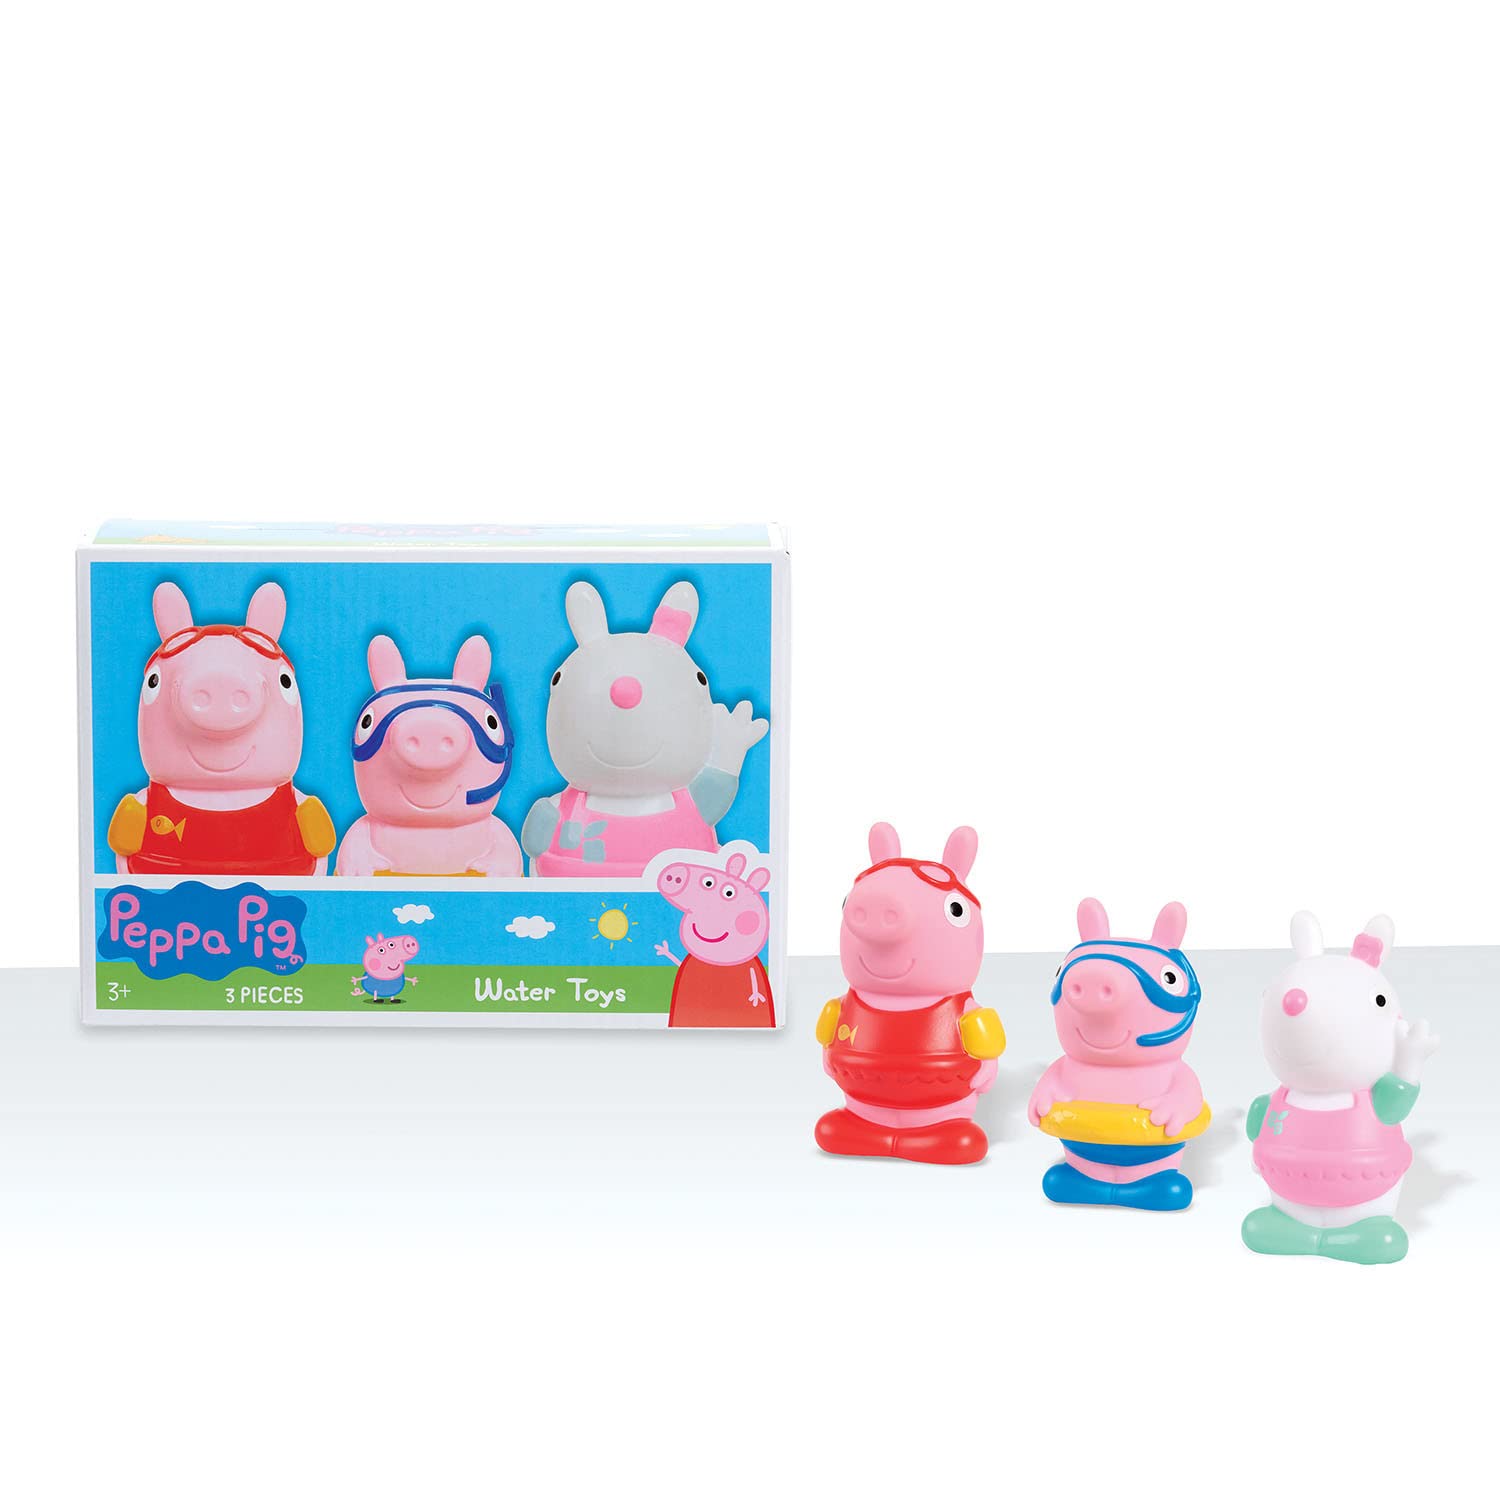 $3.99 (Prime Members): Peppa Pig Bath Toys 3-piece Set, Kids Toys for Ages 3 Up, Amazon Exclusive